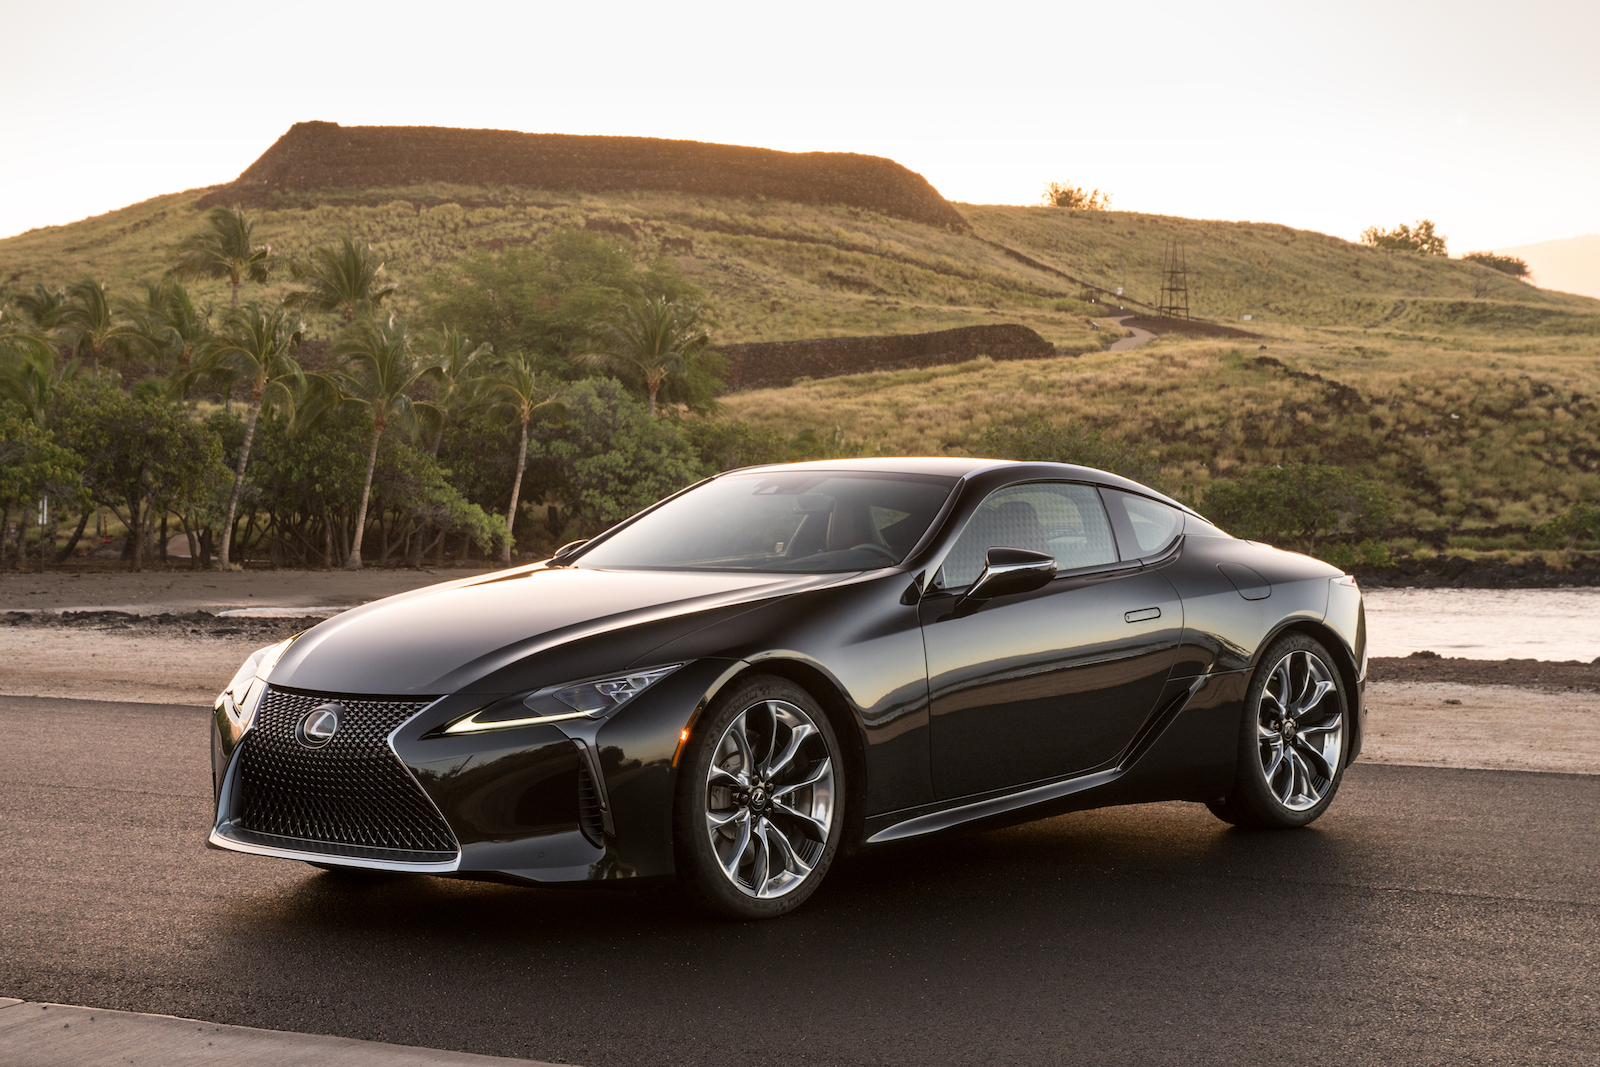 Photo Gallery The Lexus LC 500 & LC 500h in Hawaii